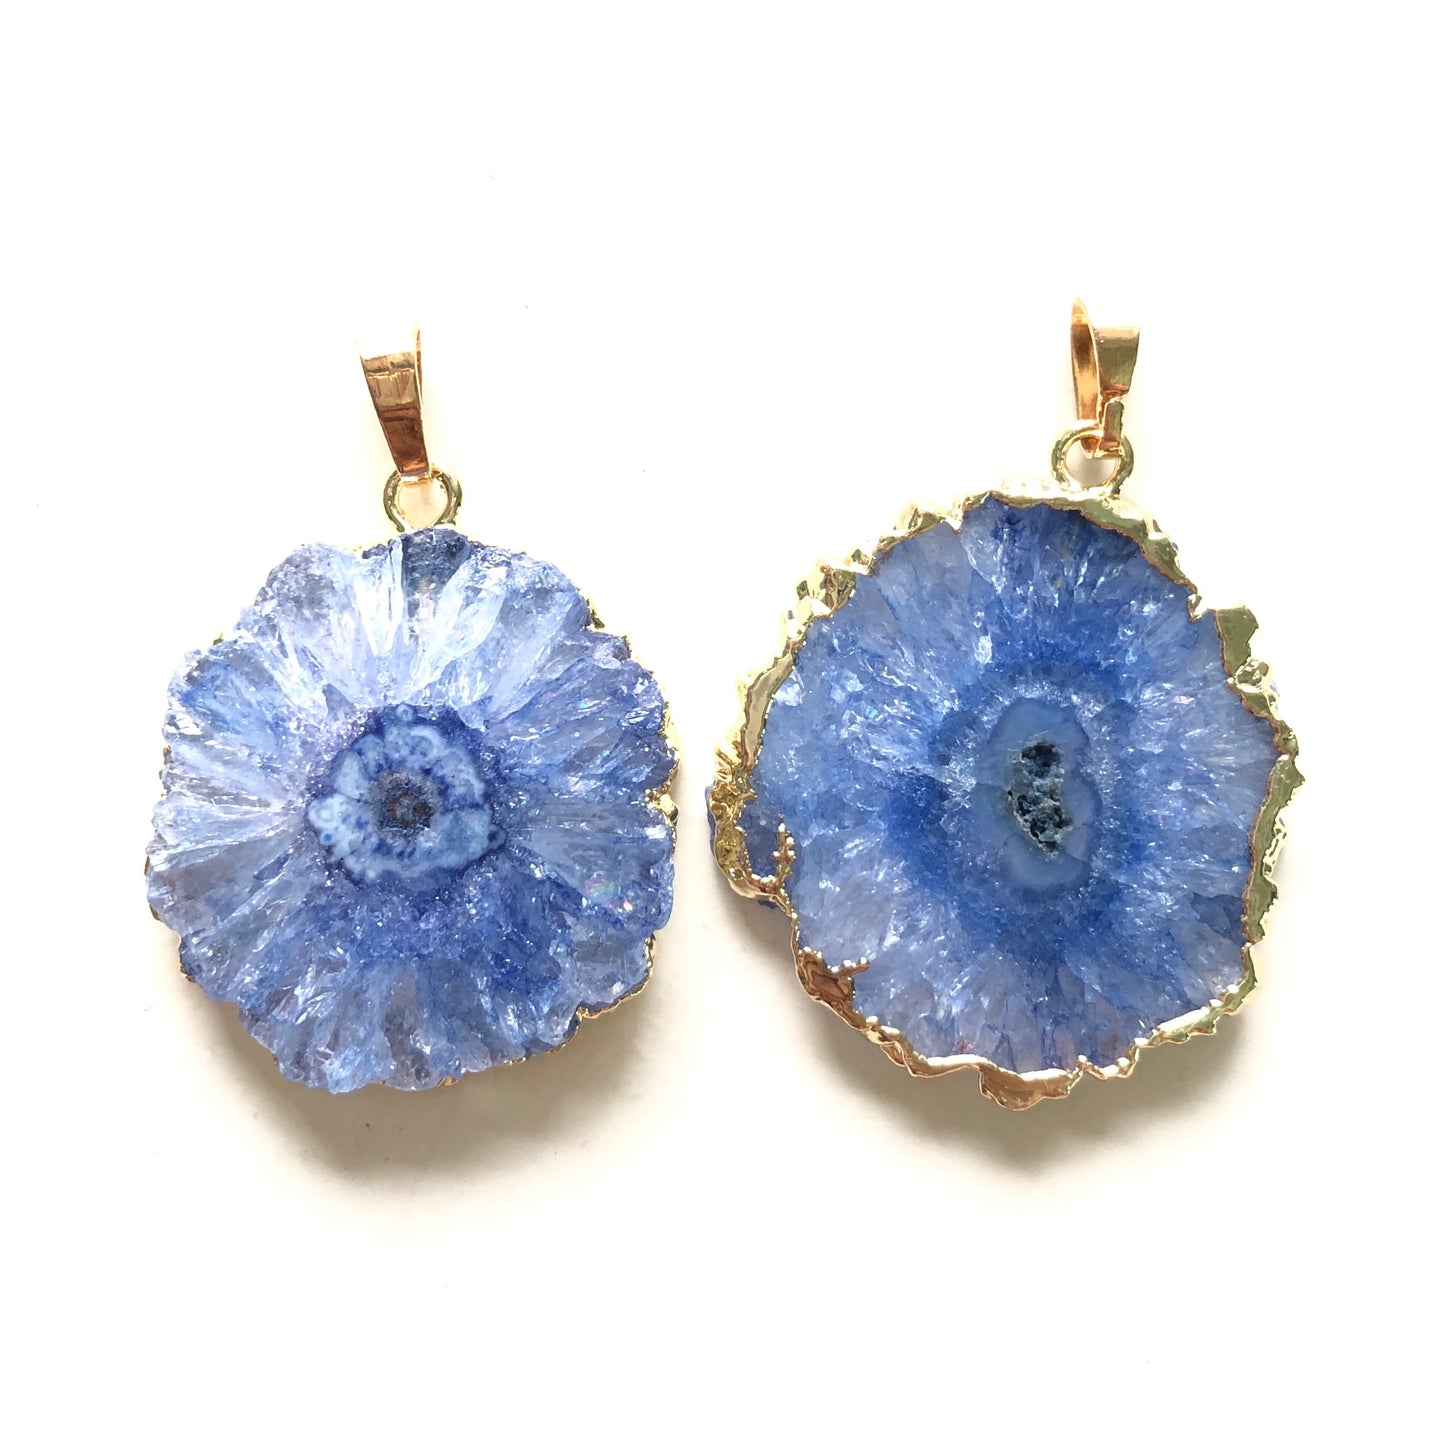 1PC 25-40mm Gold Plated Natural Sunflower Agate Charms-Premium Quality Blue on Gold Stone Charms Charms Beads Beyond